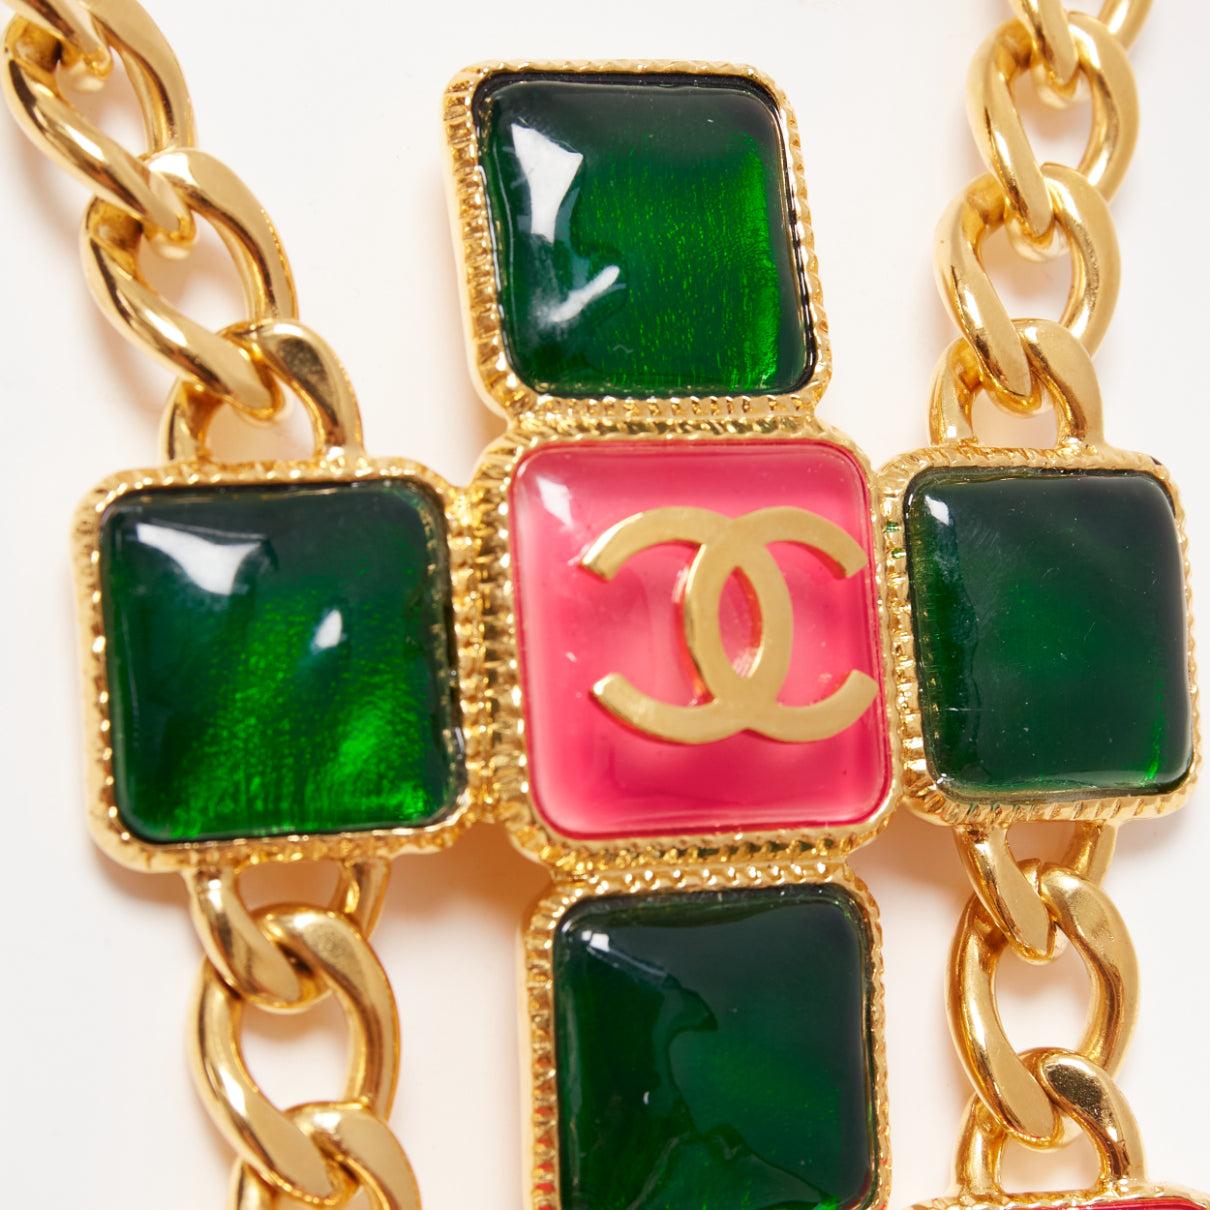 rare CHANEL B20K green pink red gripoix gold CC logo byzantine princess necklace
Reference: AAWC/A01035
Brand: Chanel
Designer: Virginie Viard
Collection: B20K
Material: Metal, Gripoix
Color: Gold, Multicolour
Pattern: Solid
Closure: Lobster